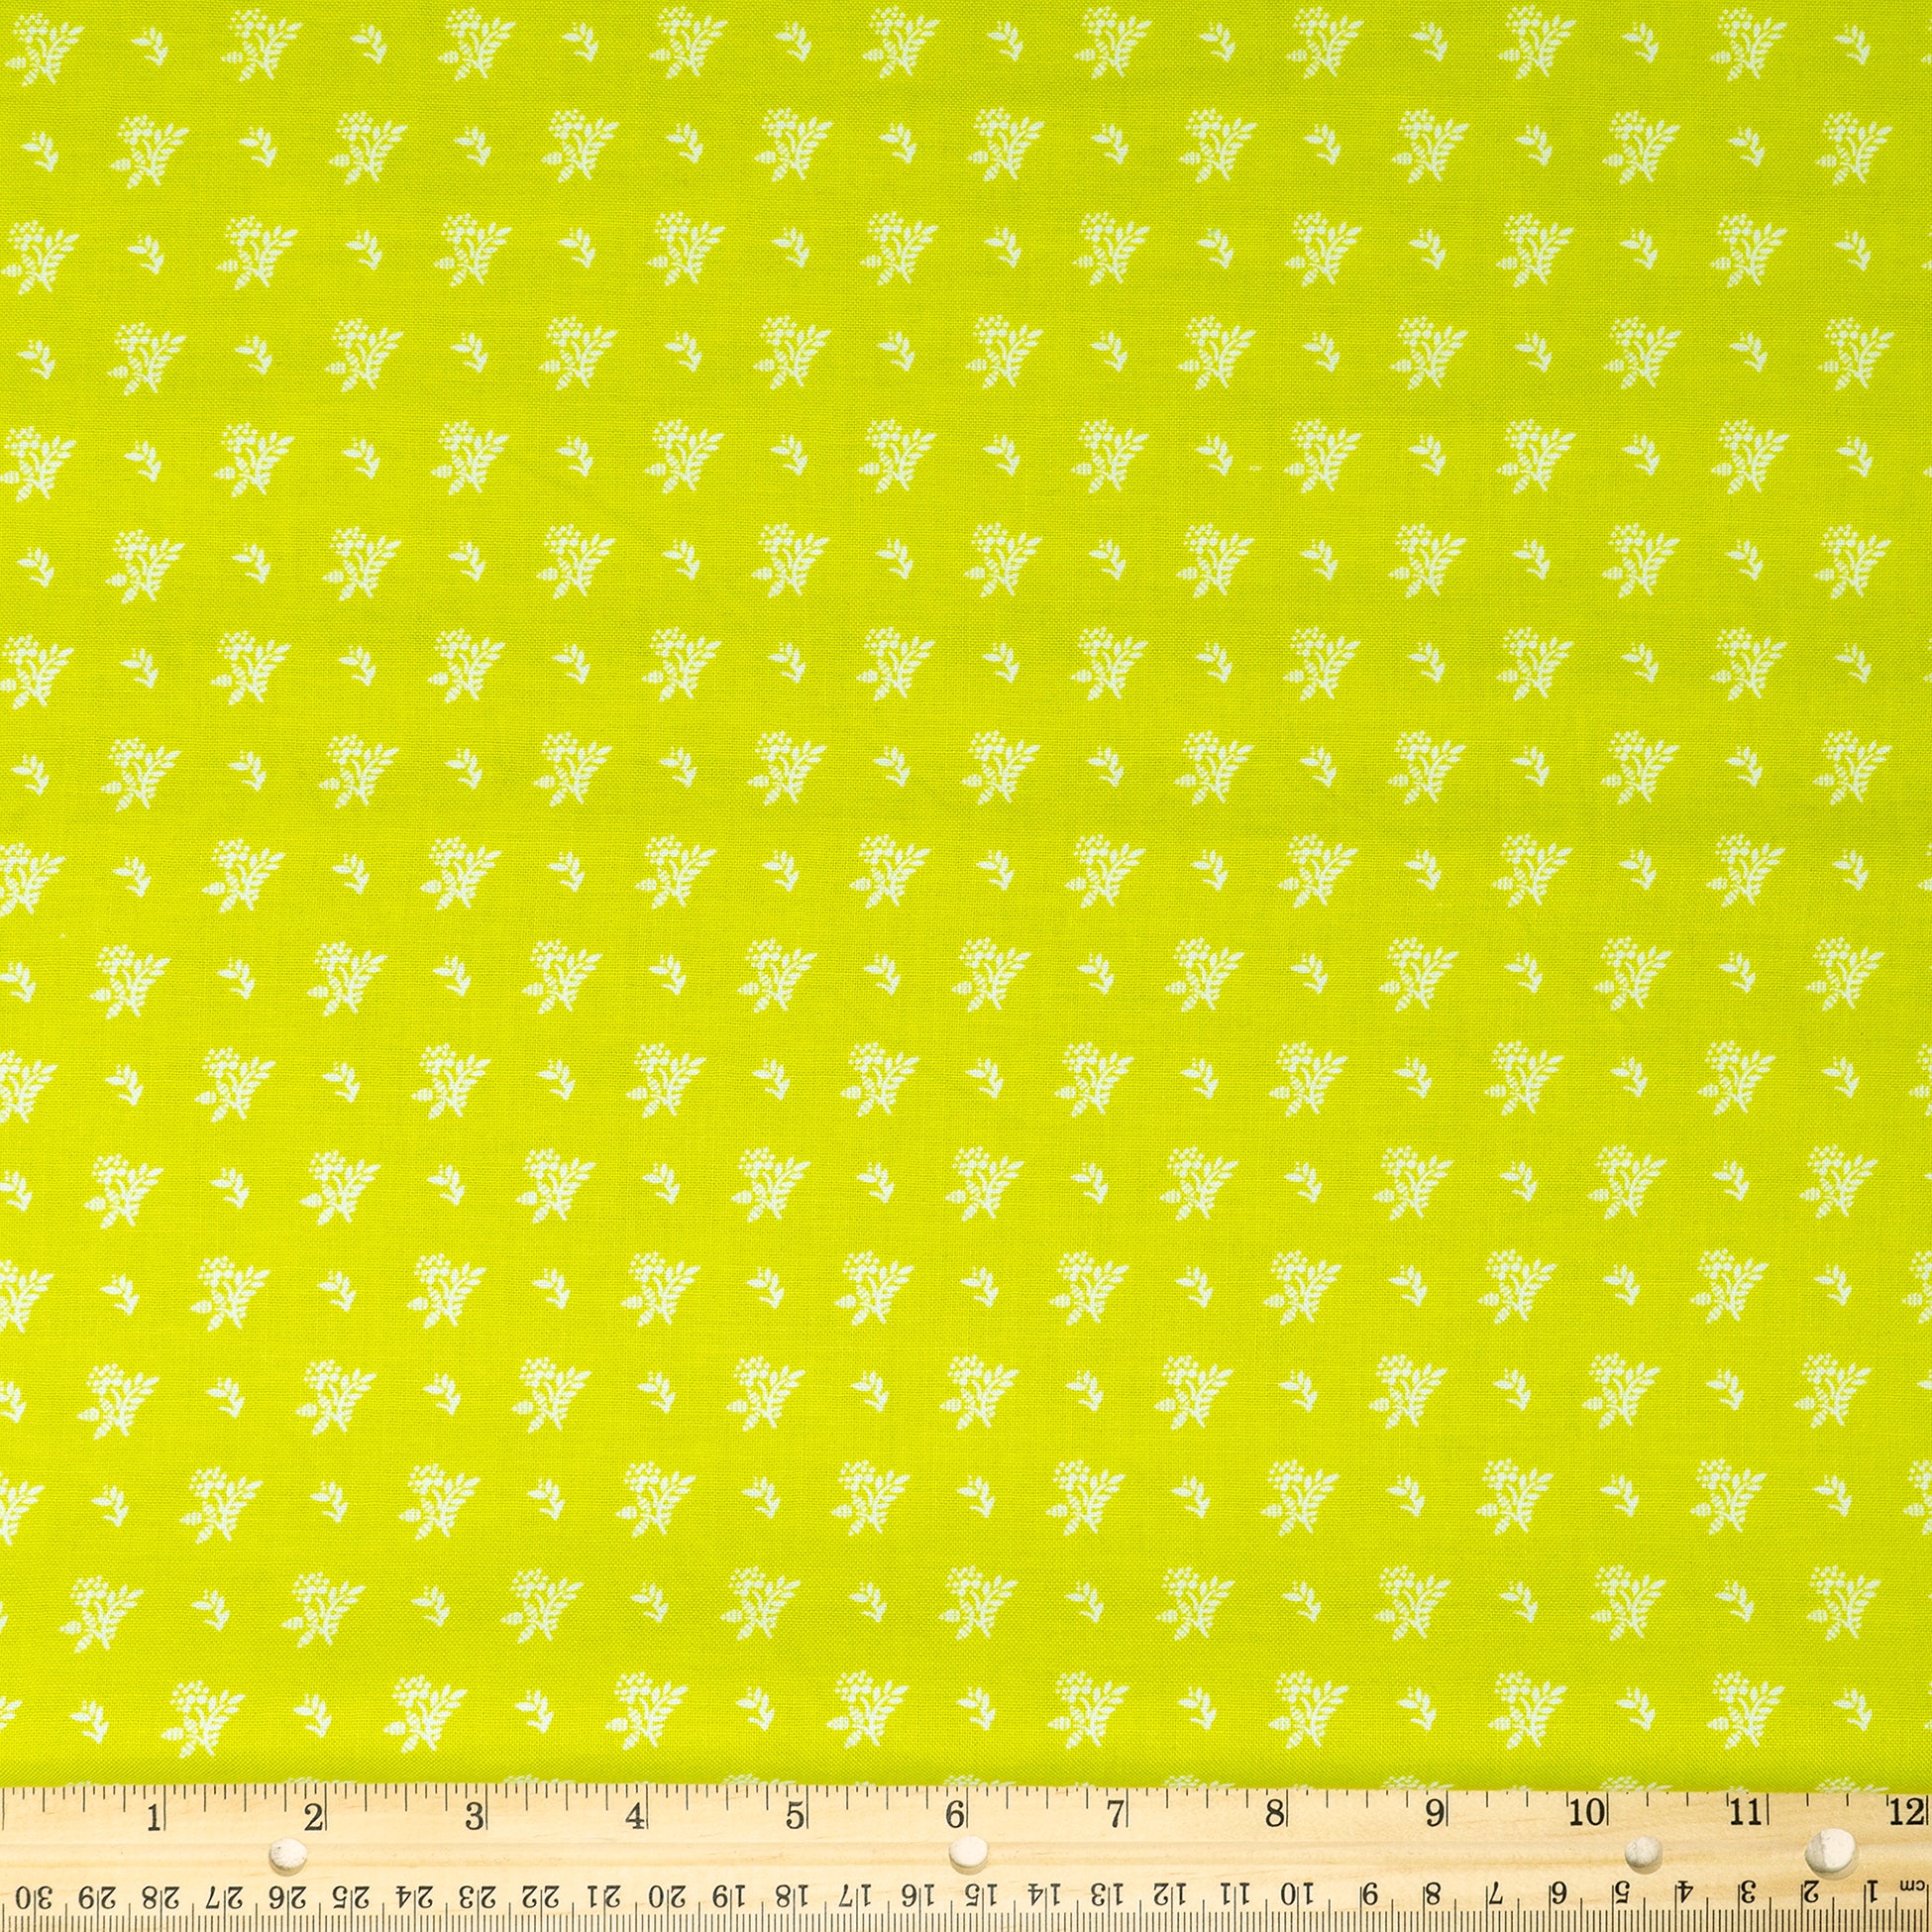 Waverly Inspirations Cotton 44" Mini Bouquet Lime Color Sewing Fabric by the Yard